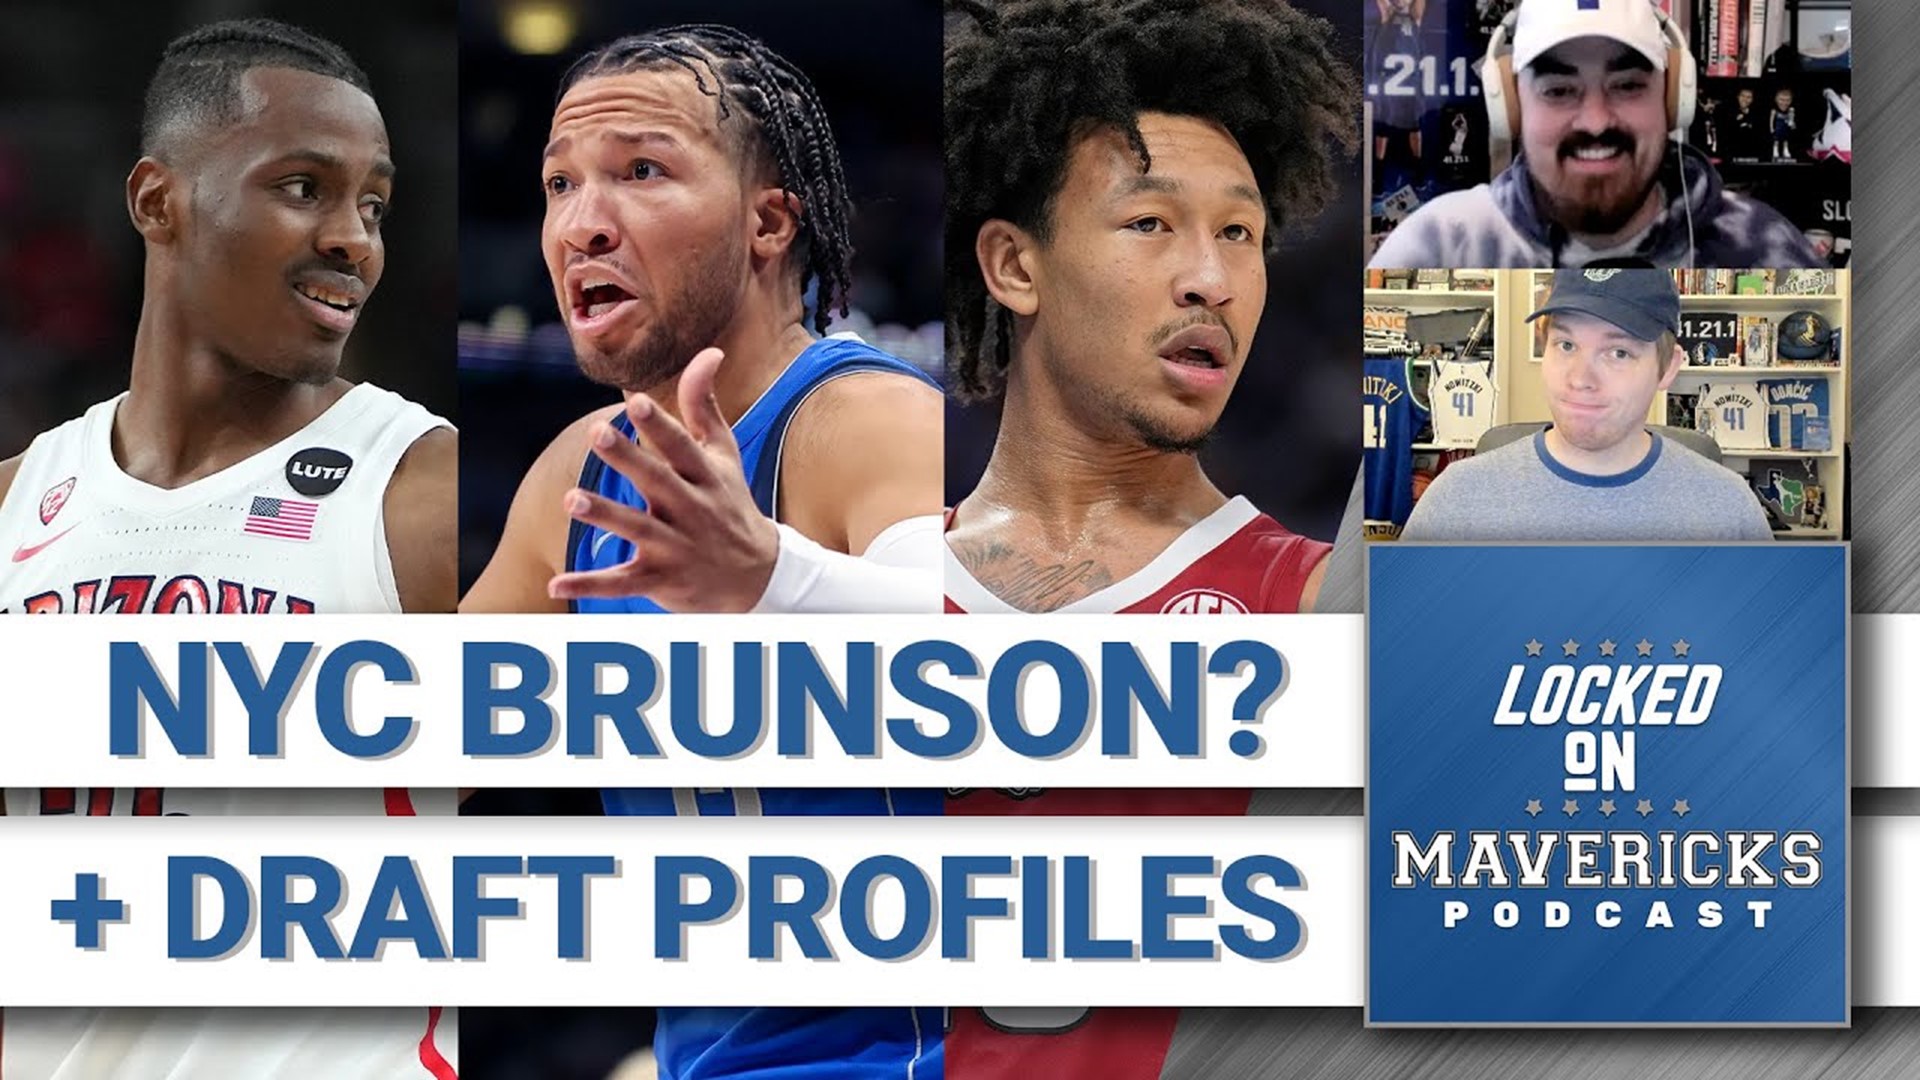 Jalen Brunson's dad was hired by the New York Knicks, should the Dallas Mavericks be concerned?